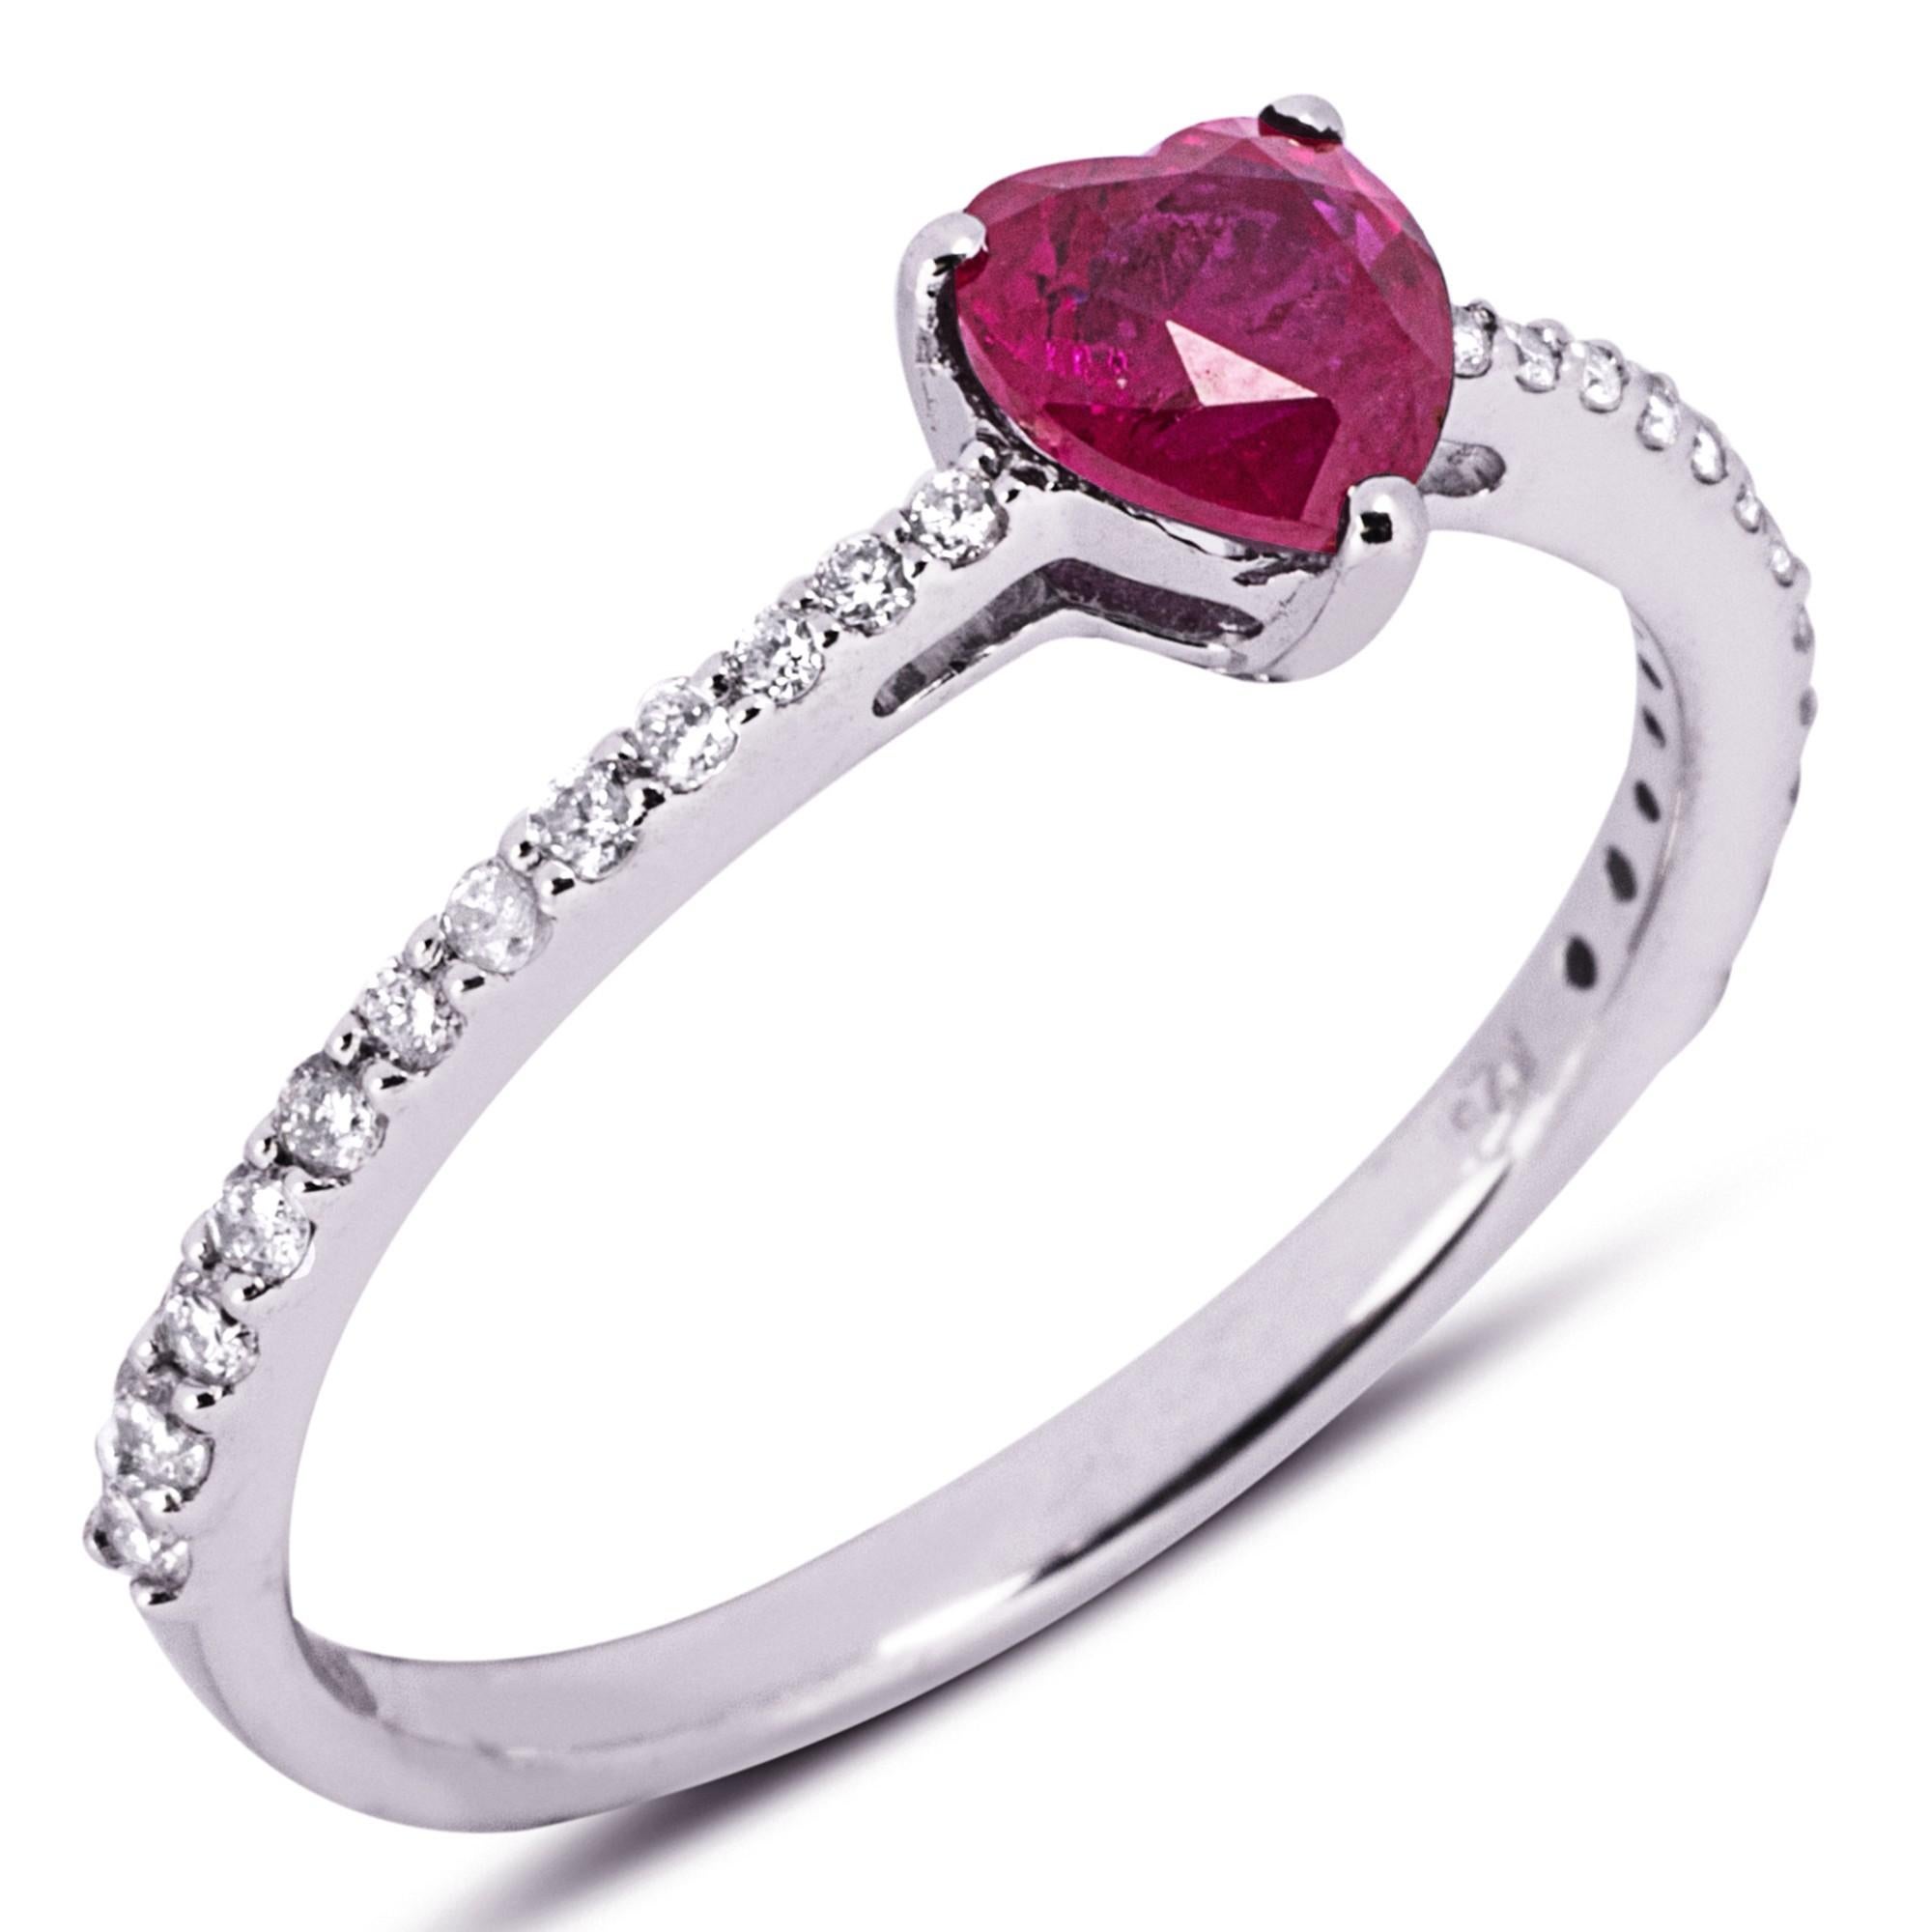 Alex Jona Design collection, hand crafted in Italy, 18 Karat white gold ring centering a 0.99 carat heart cut natural ruby, accented with 24 white diamonds, F-G color, VS clarity, for total 0.24 carats.
Alex Jona jewels stand out, not only for their